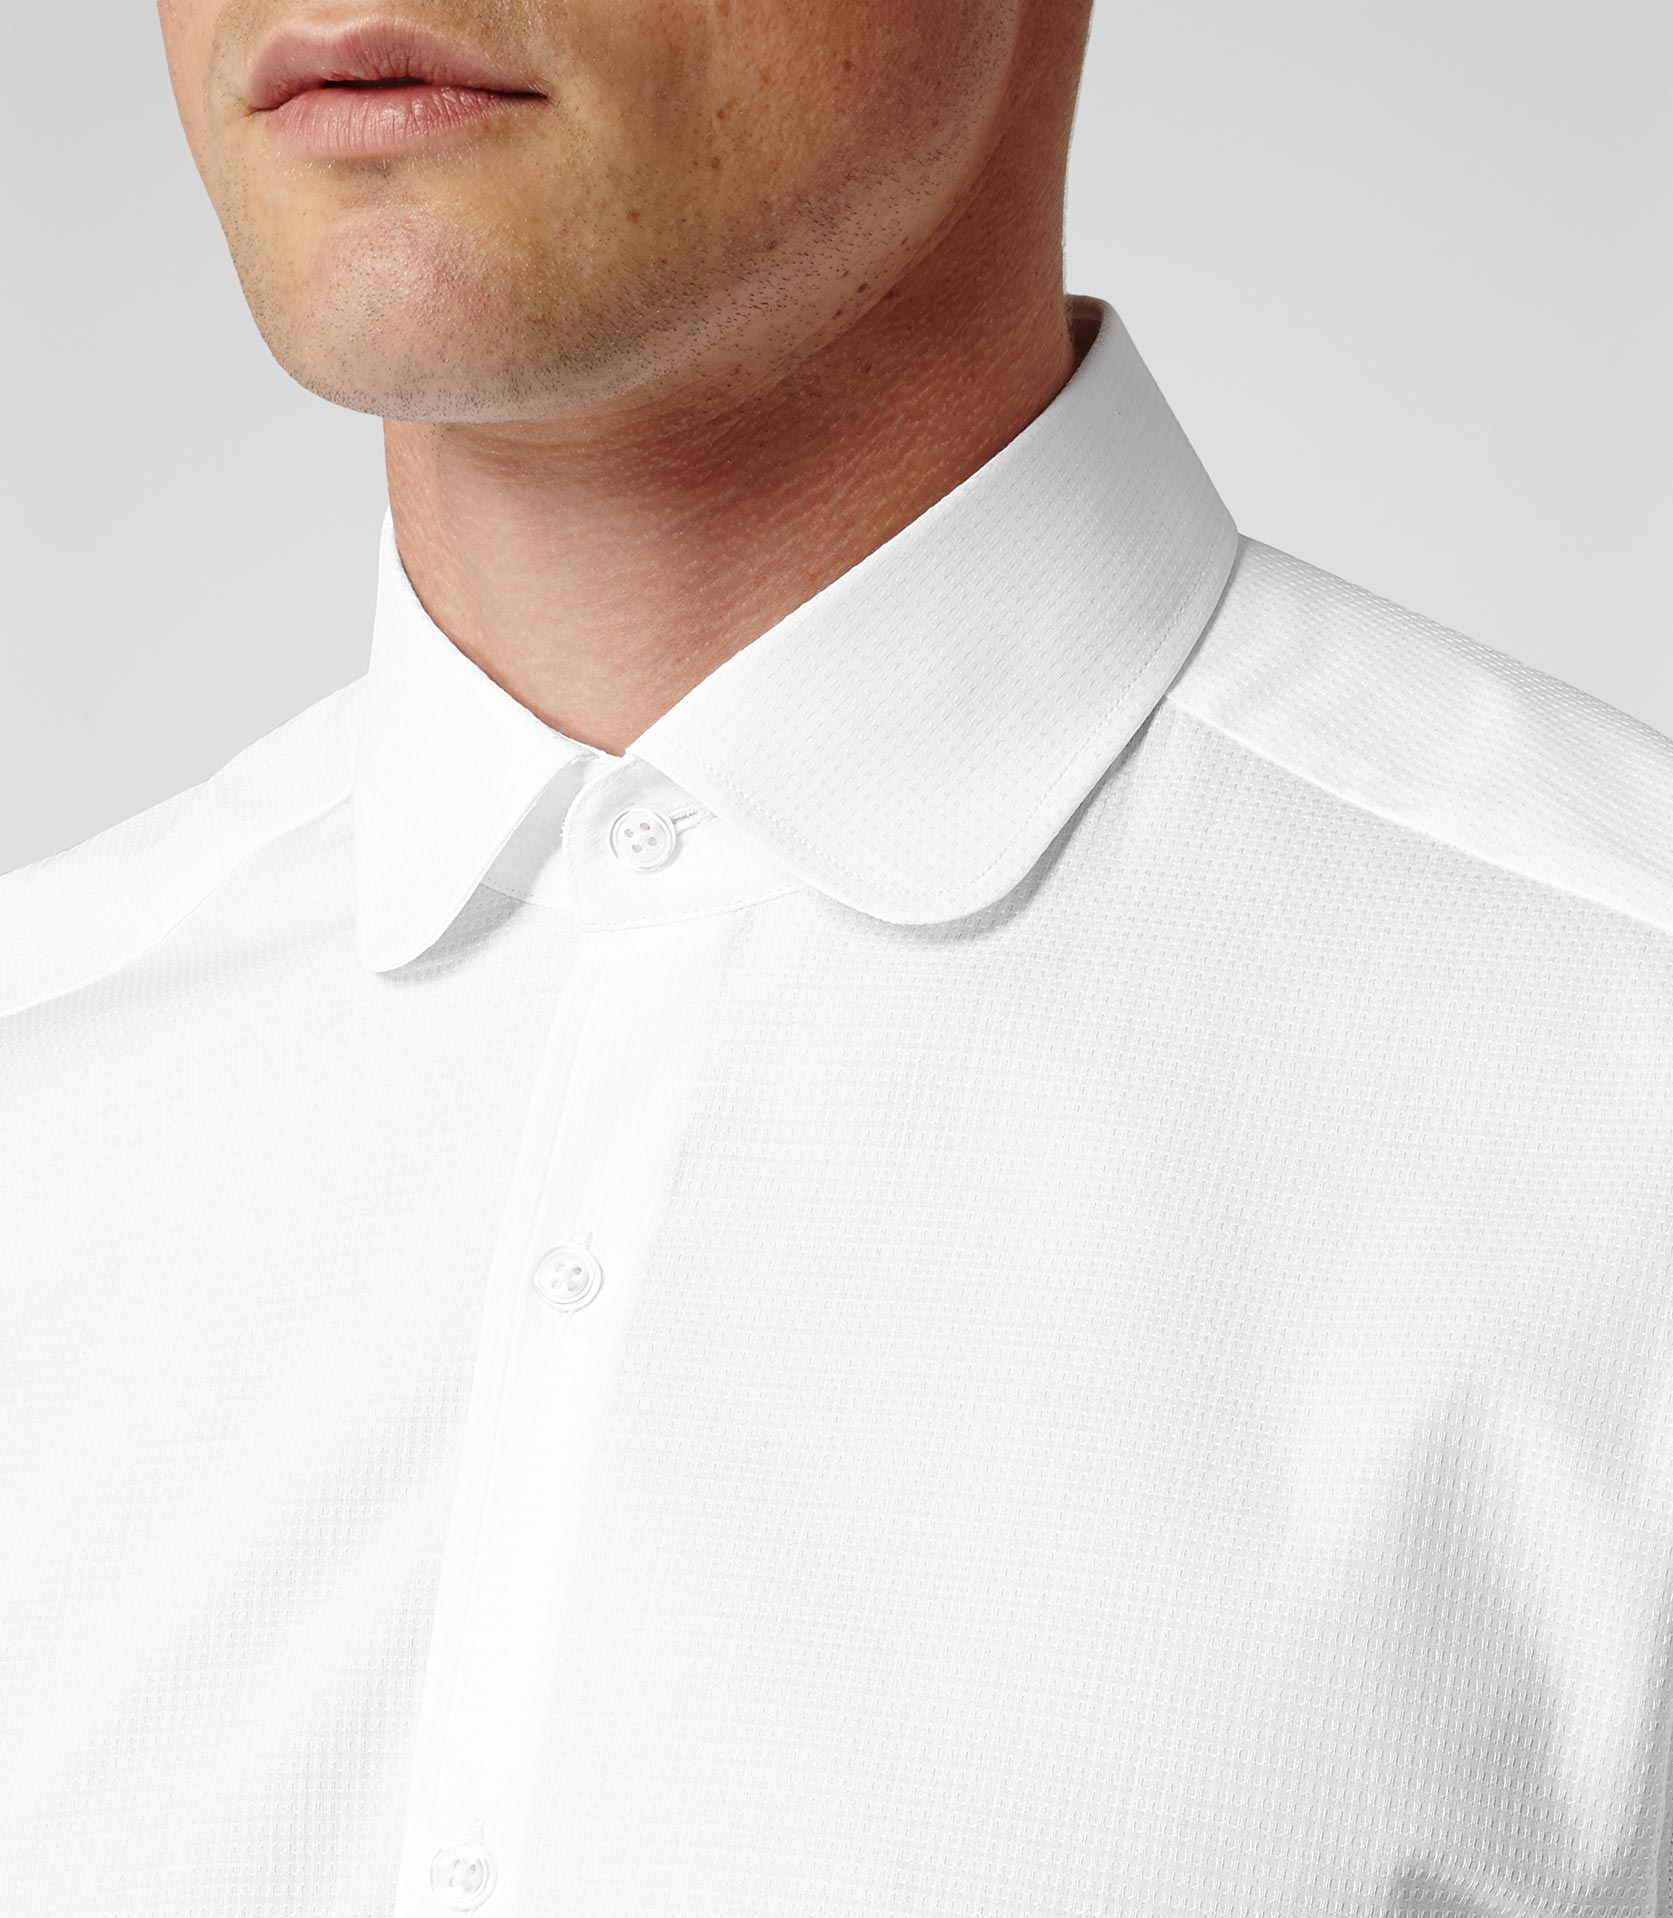 Reiss Rhyme Textured Curved Collar Shirt in White for Men - Lyst